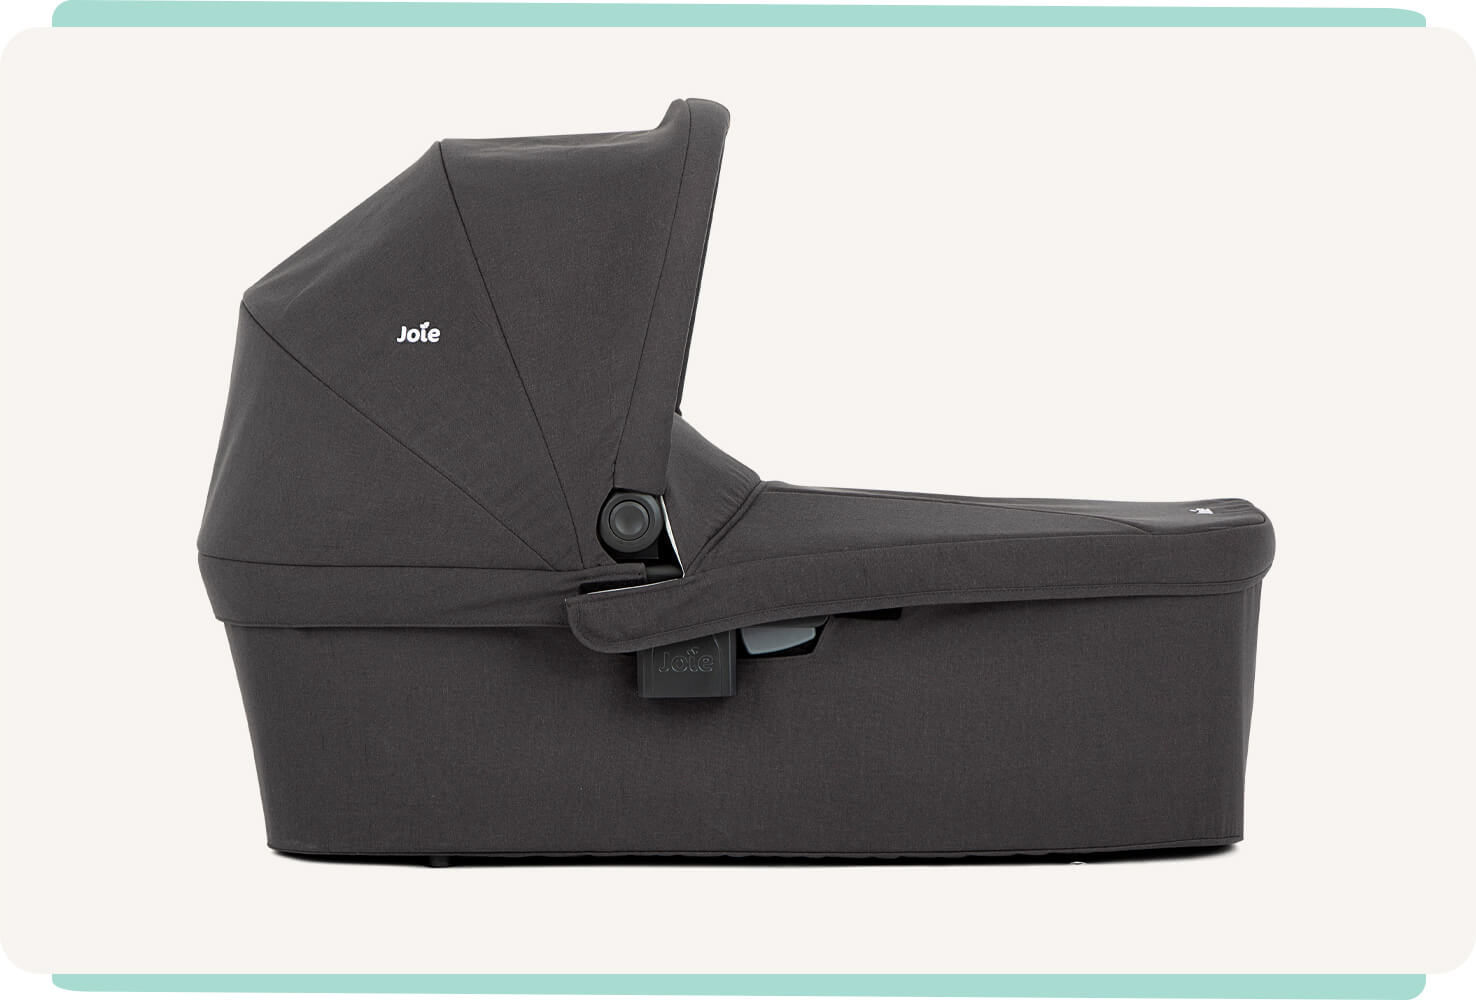   Black Joie Ramble XL carry cot in profile facing to the right.